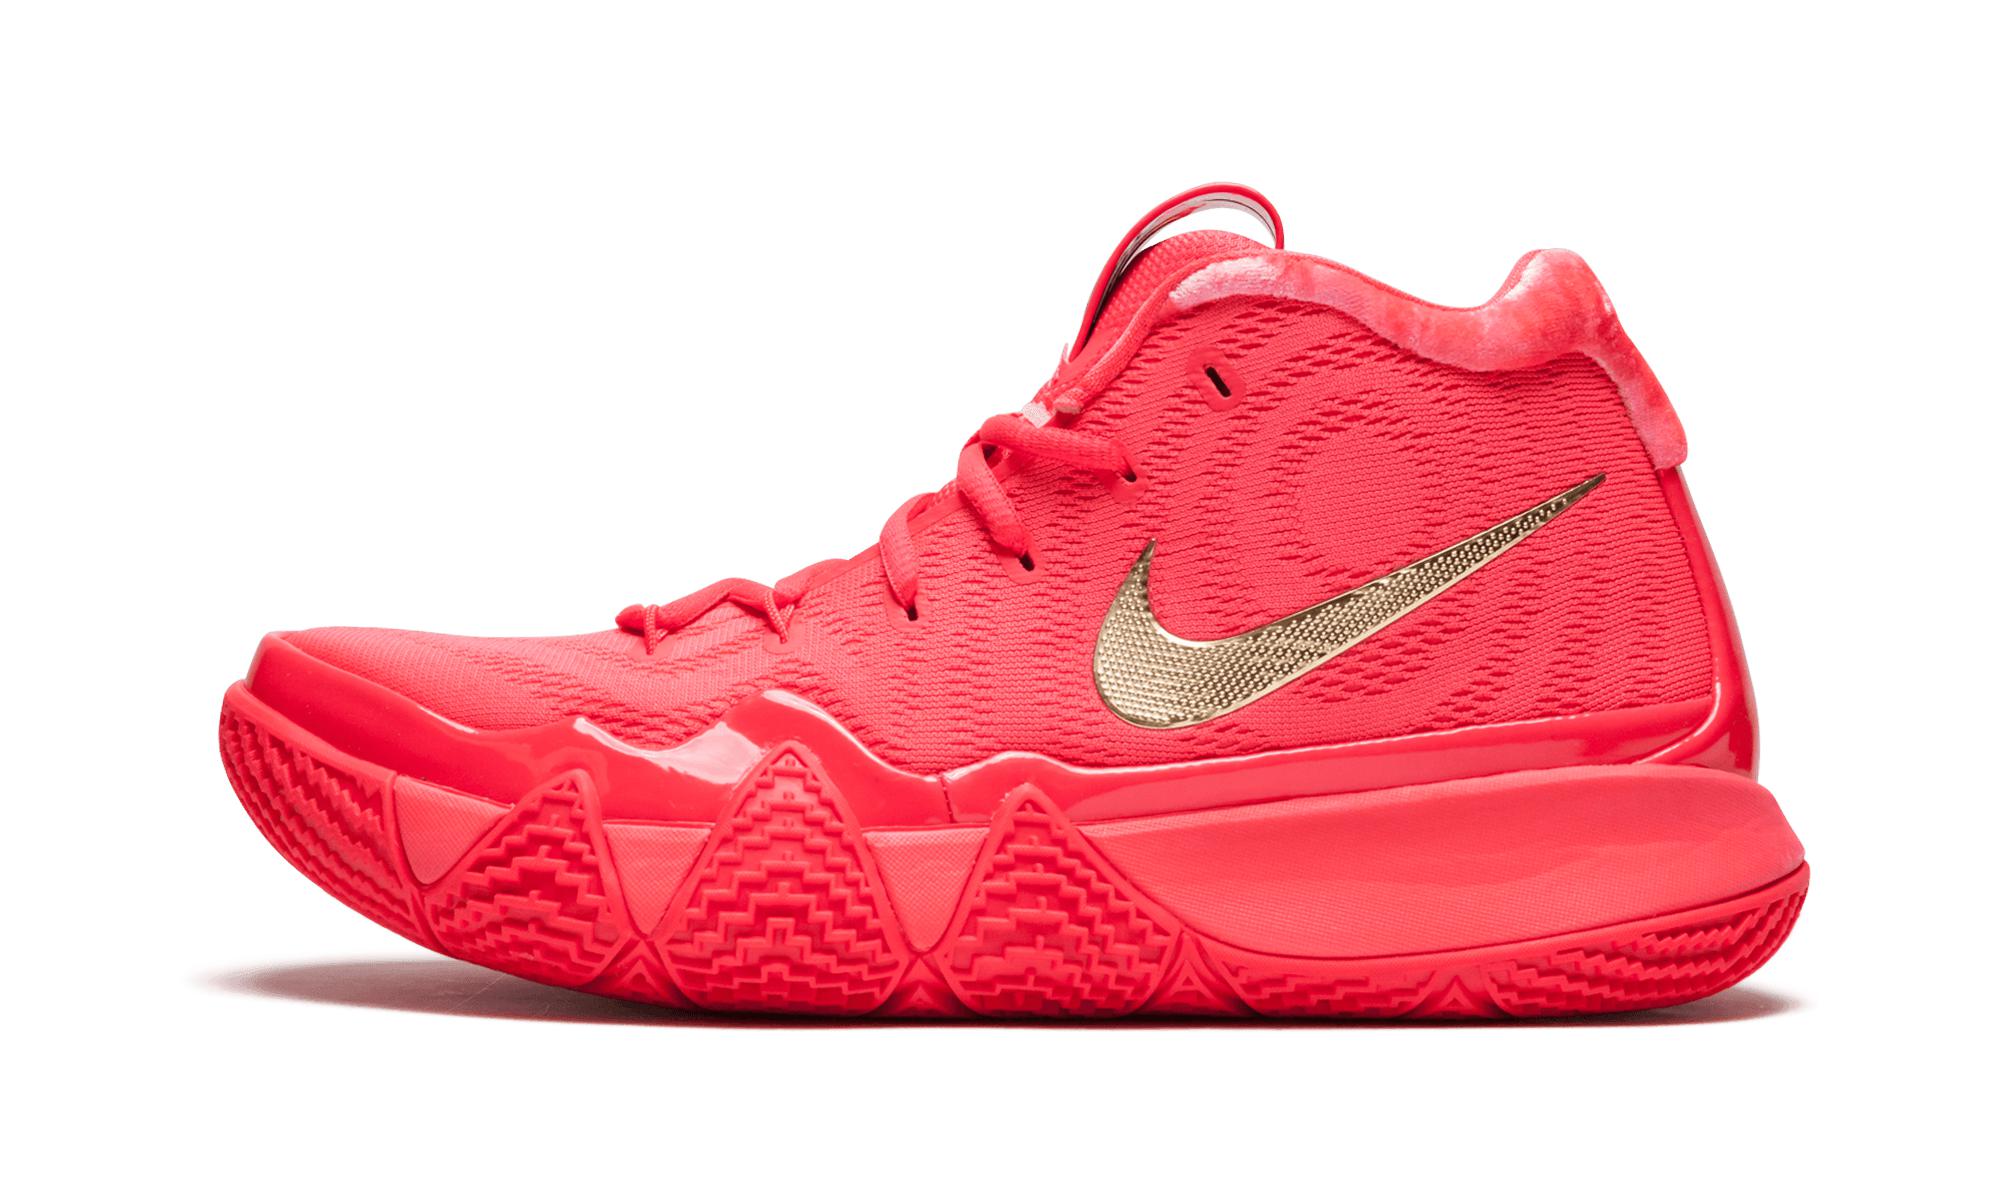 Lyst - Nike Kyrie 4 in Red for Men - Save 36.36363636363637%